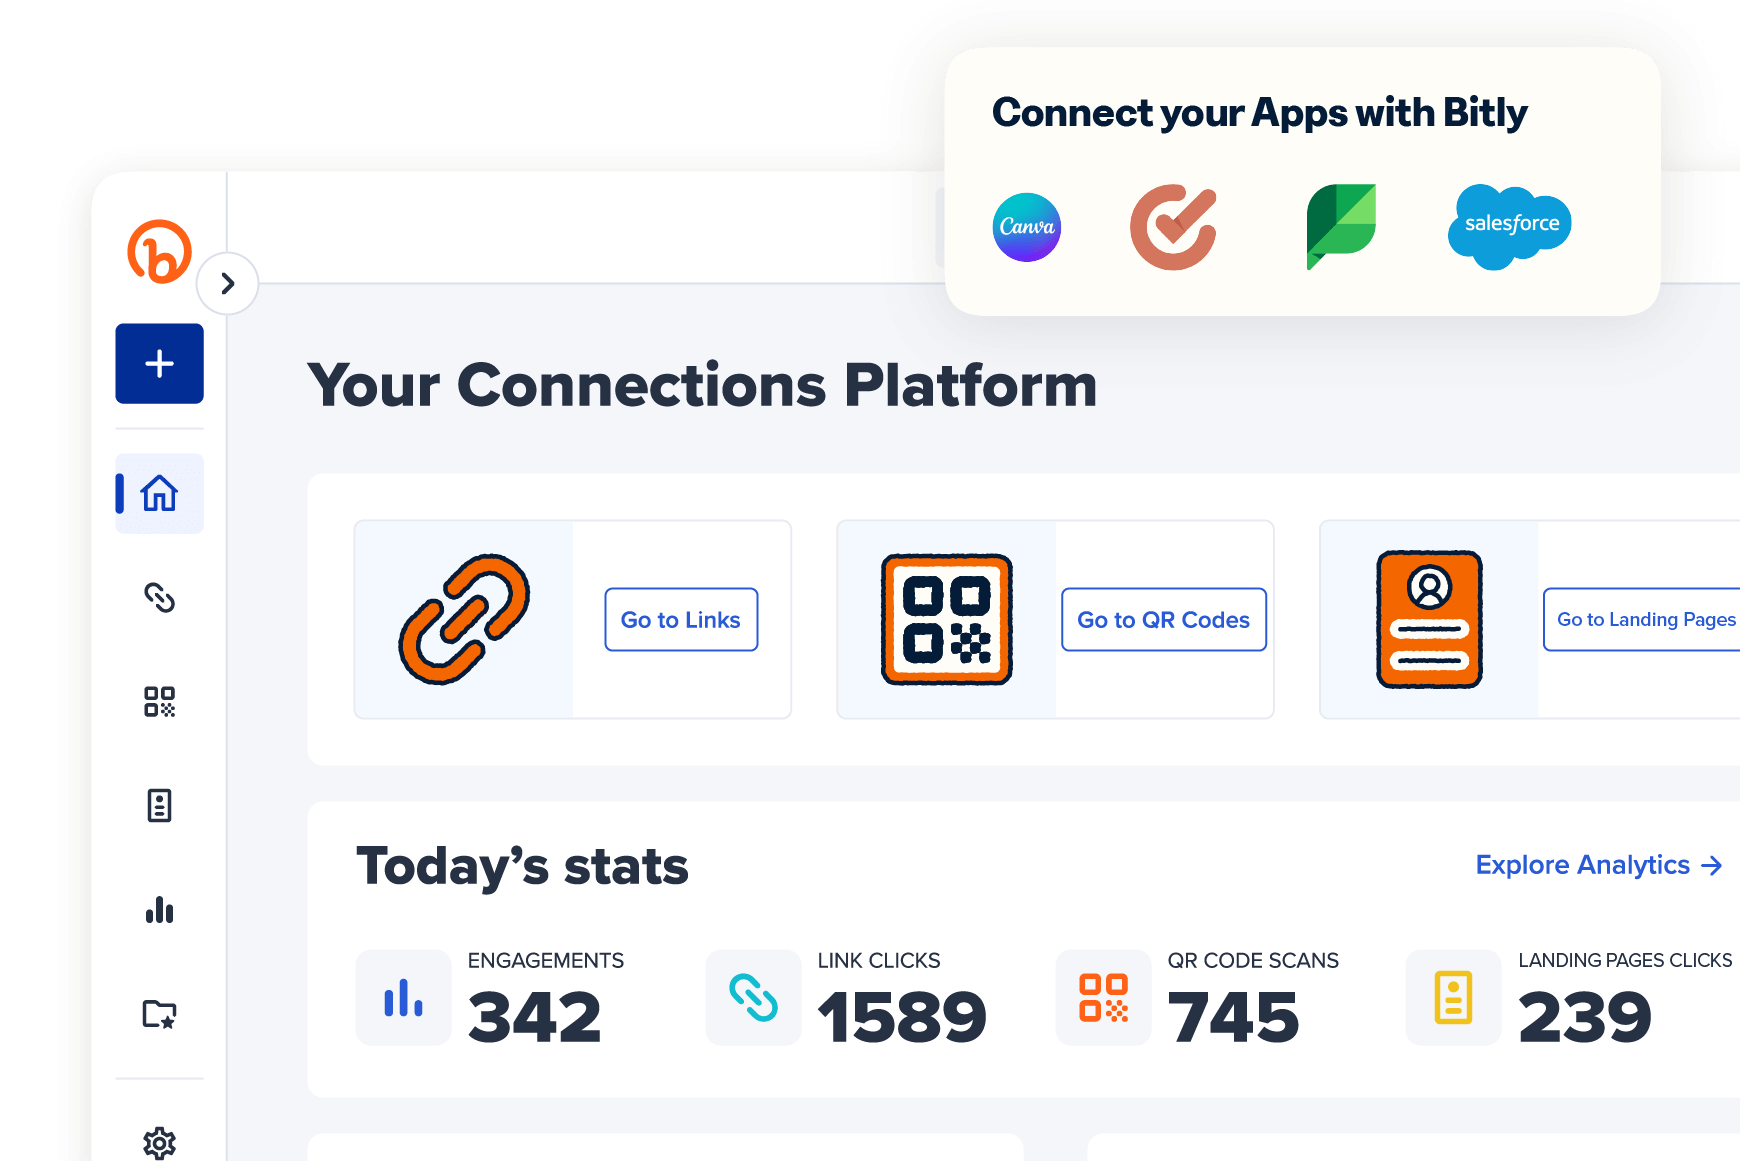 Your Connections Platform page in a user account